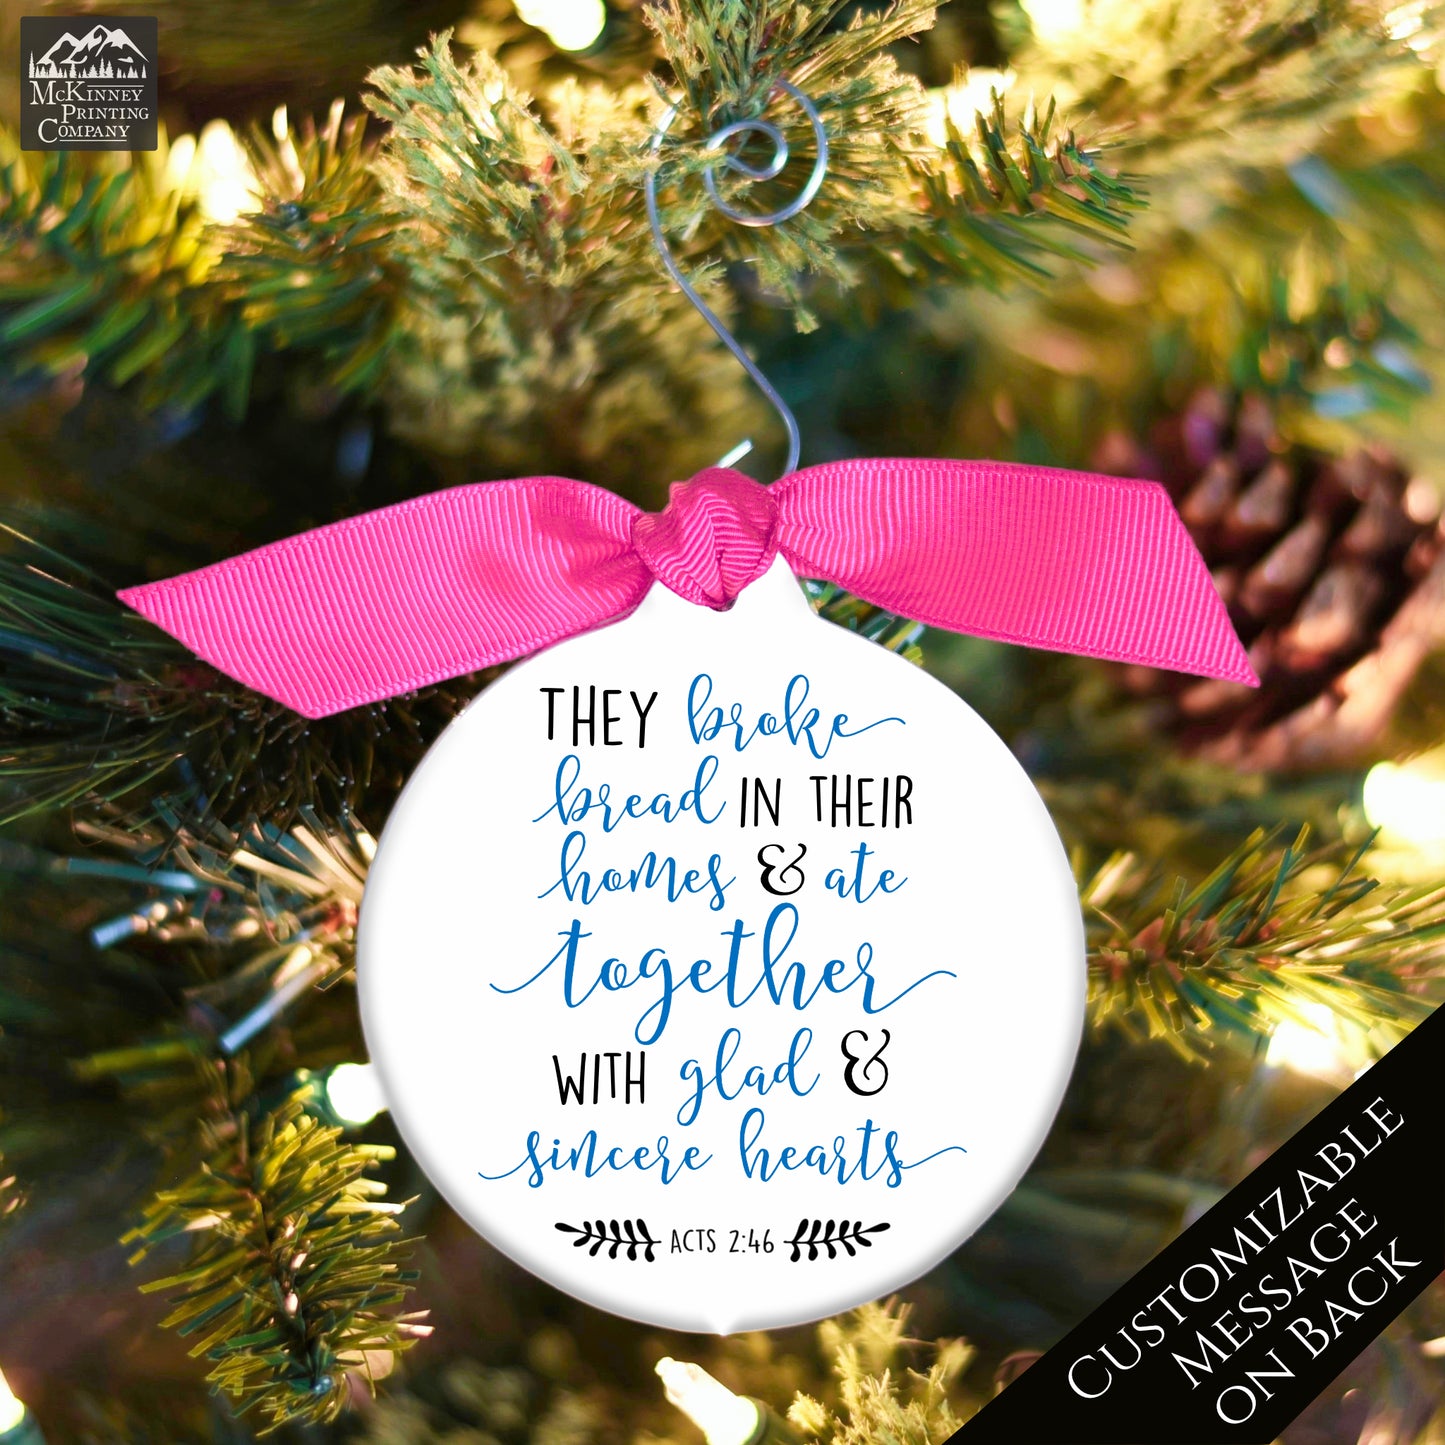 They broke bread in their homes and ate together with glad and sincere hearts - Acts 2:46 - Christmas Ornament